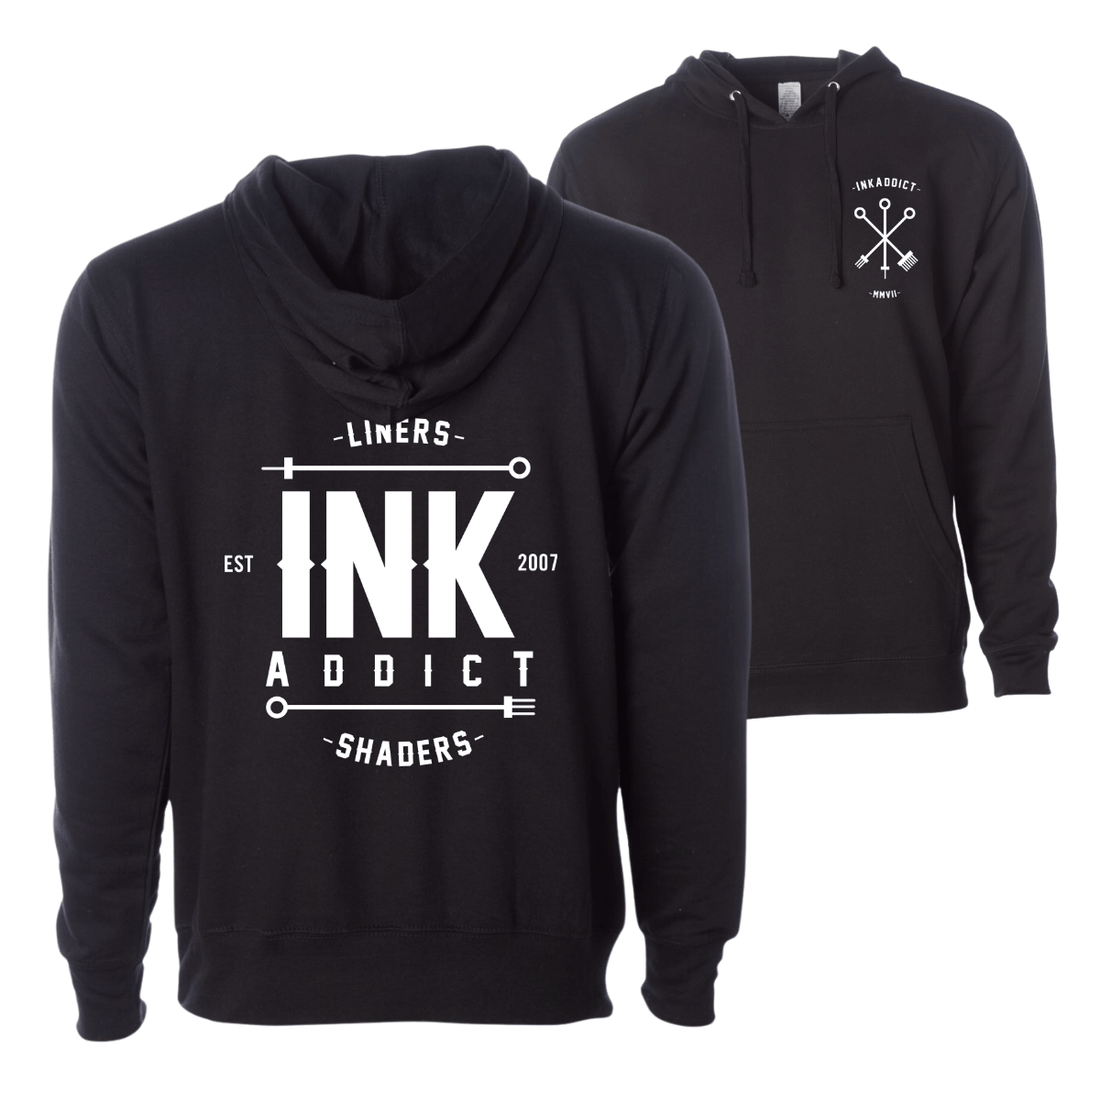 InkAddict Liners & Shaders Unisex Pullover